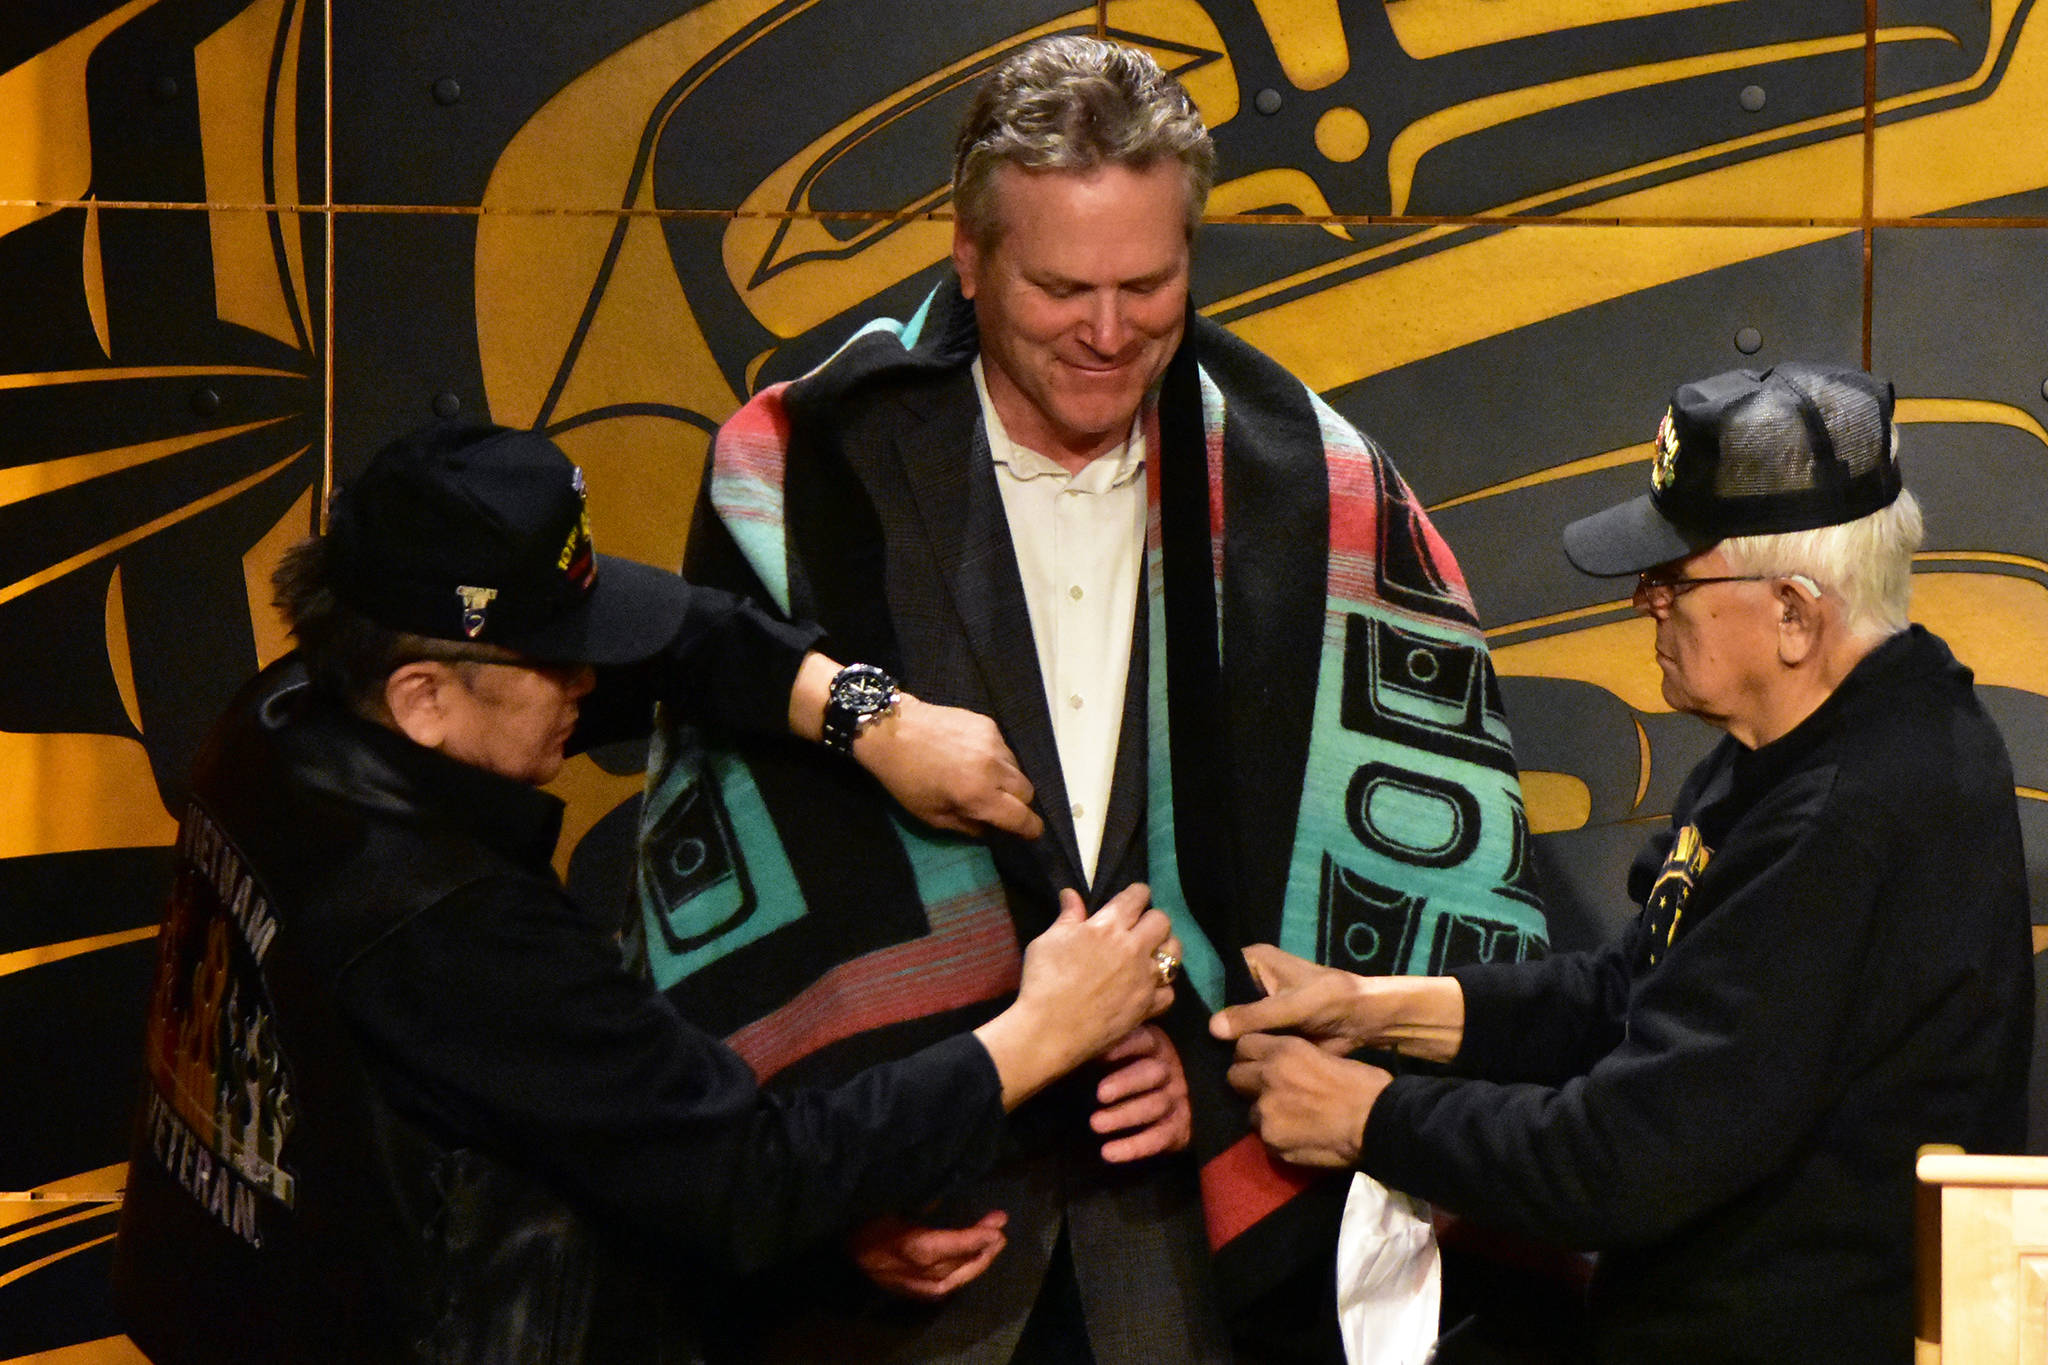 Alaska Native Vietnam War veterans James Lindoff, left and George Bennett, right, drape a ceremonial blanket over Gov. Mike Dunleavy, center, during a news conference on Wednesday, May 5, 2021. Dunleavy is proposing a program allowing Alaska Native veterans to exchange federal land for state lands potentially closer to their homes. (Peter Segall / Juneau Empire)